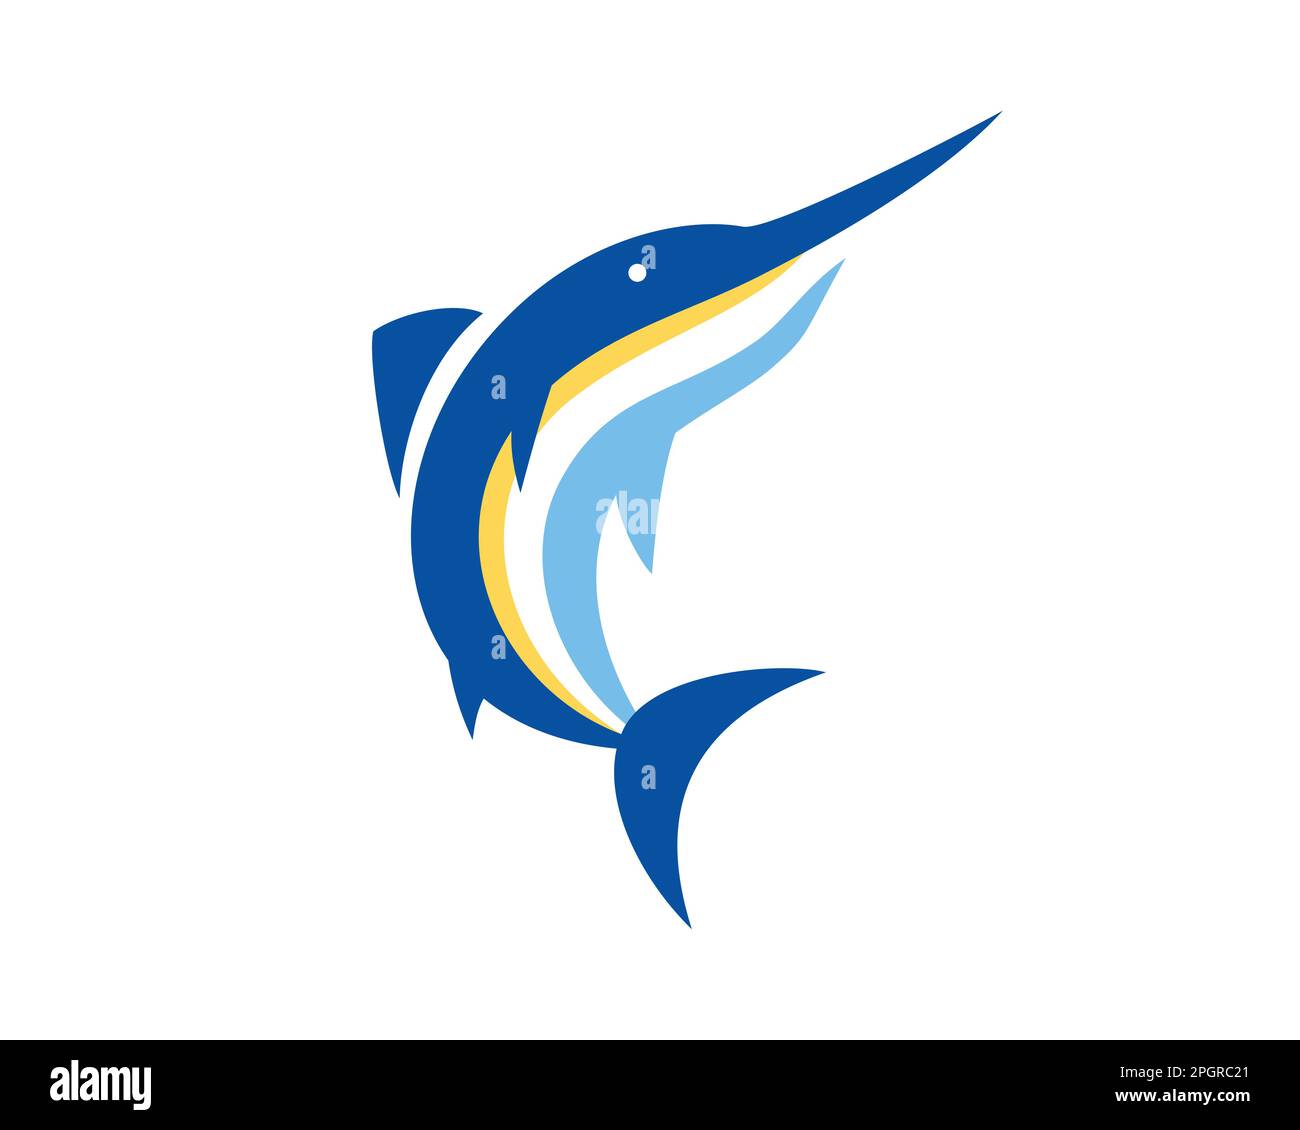 Jumping Swordfish visualized with Simple Illustration Stock Vector